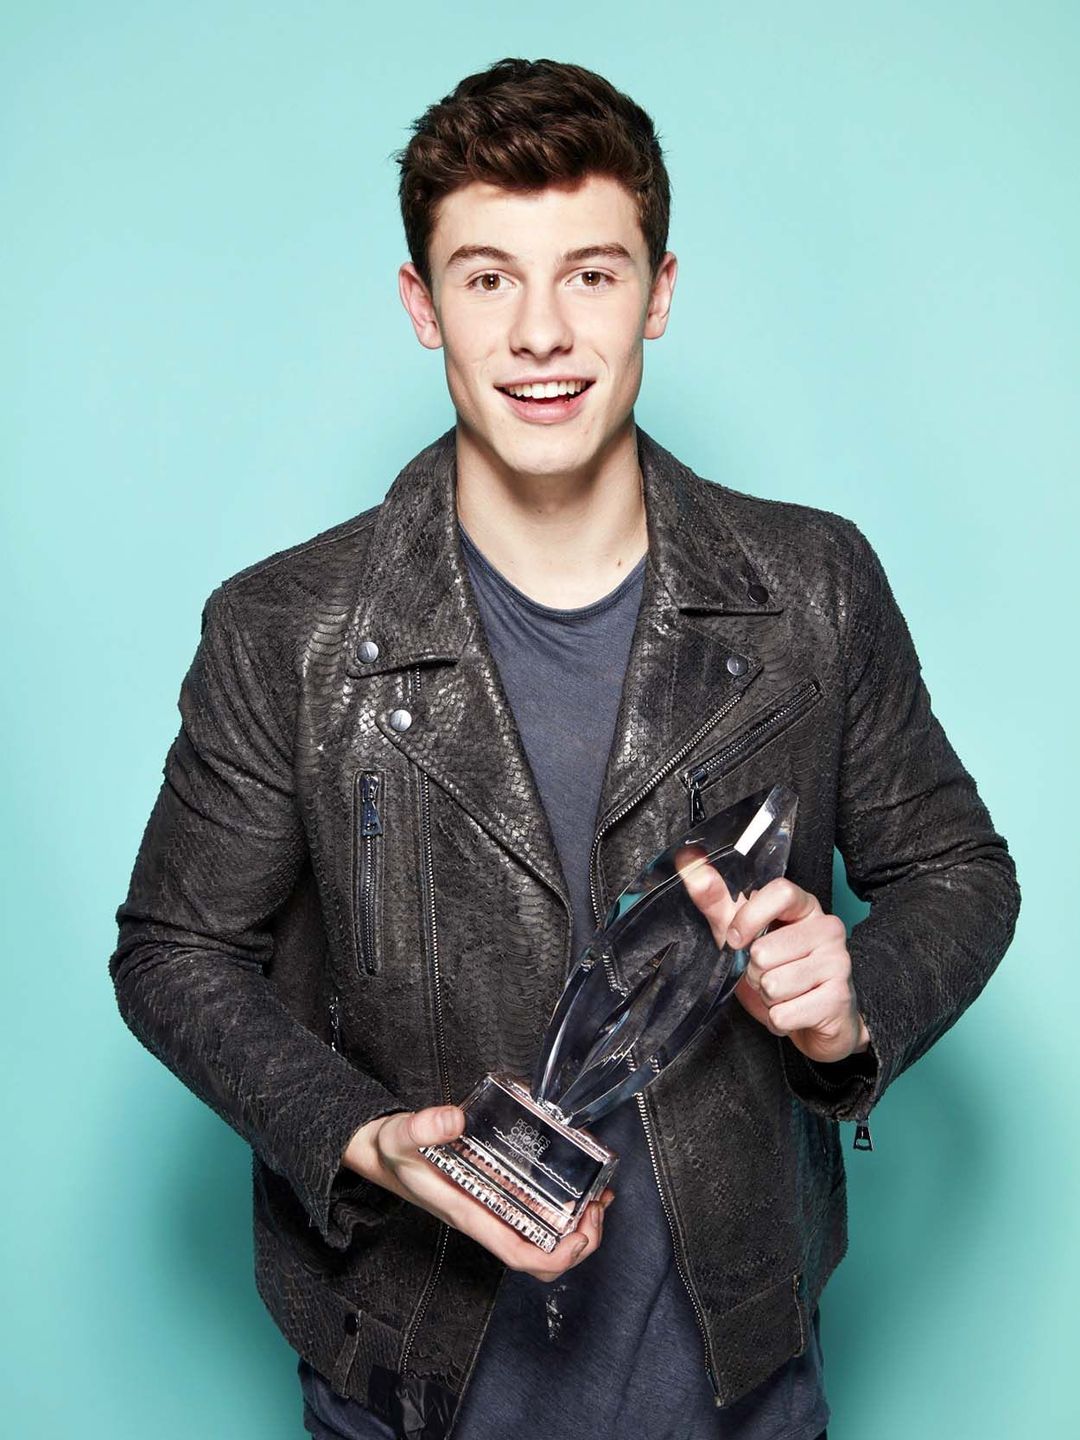 Shawn Mendes story of success